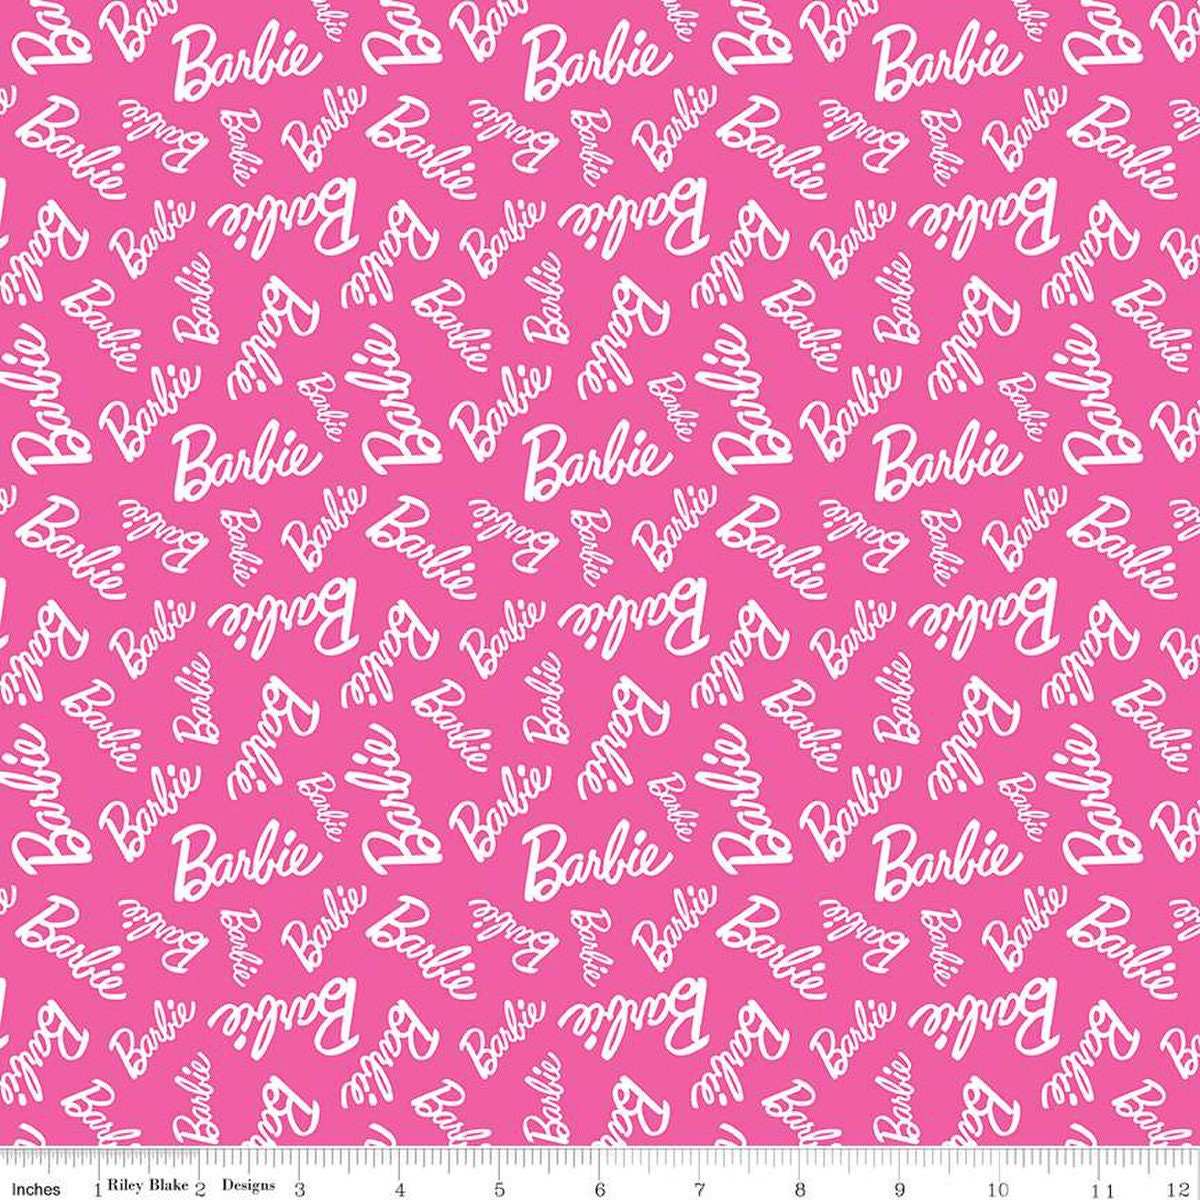 8x11, Barbie Leather, Custom Leather Sheets, Come On Let's Go Party  Leather, Barbie Movie Synthetic Leather Sheet, Faux Leather, Litchi,  Glitter, Patent, Vinyl, DIY Hair Bows, 1 Sheet - Jennifer's Goodies Galore